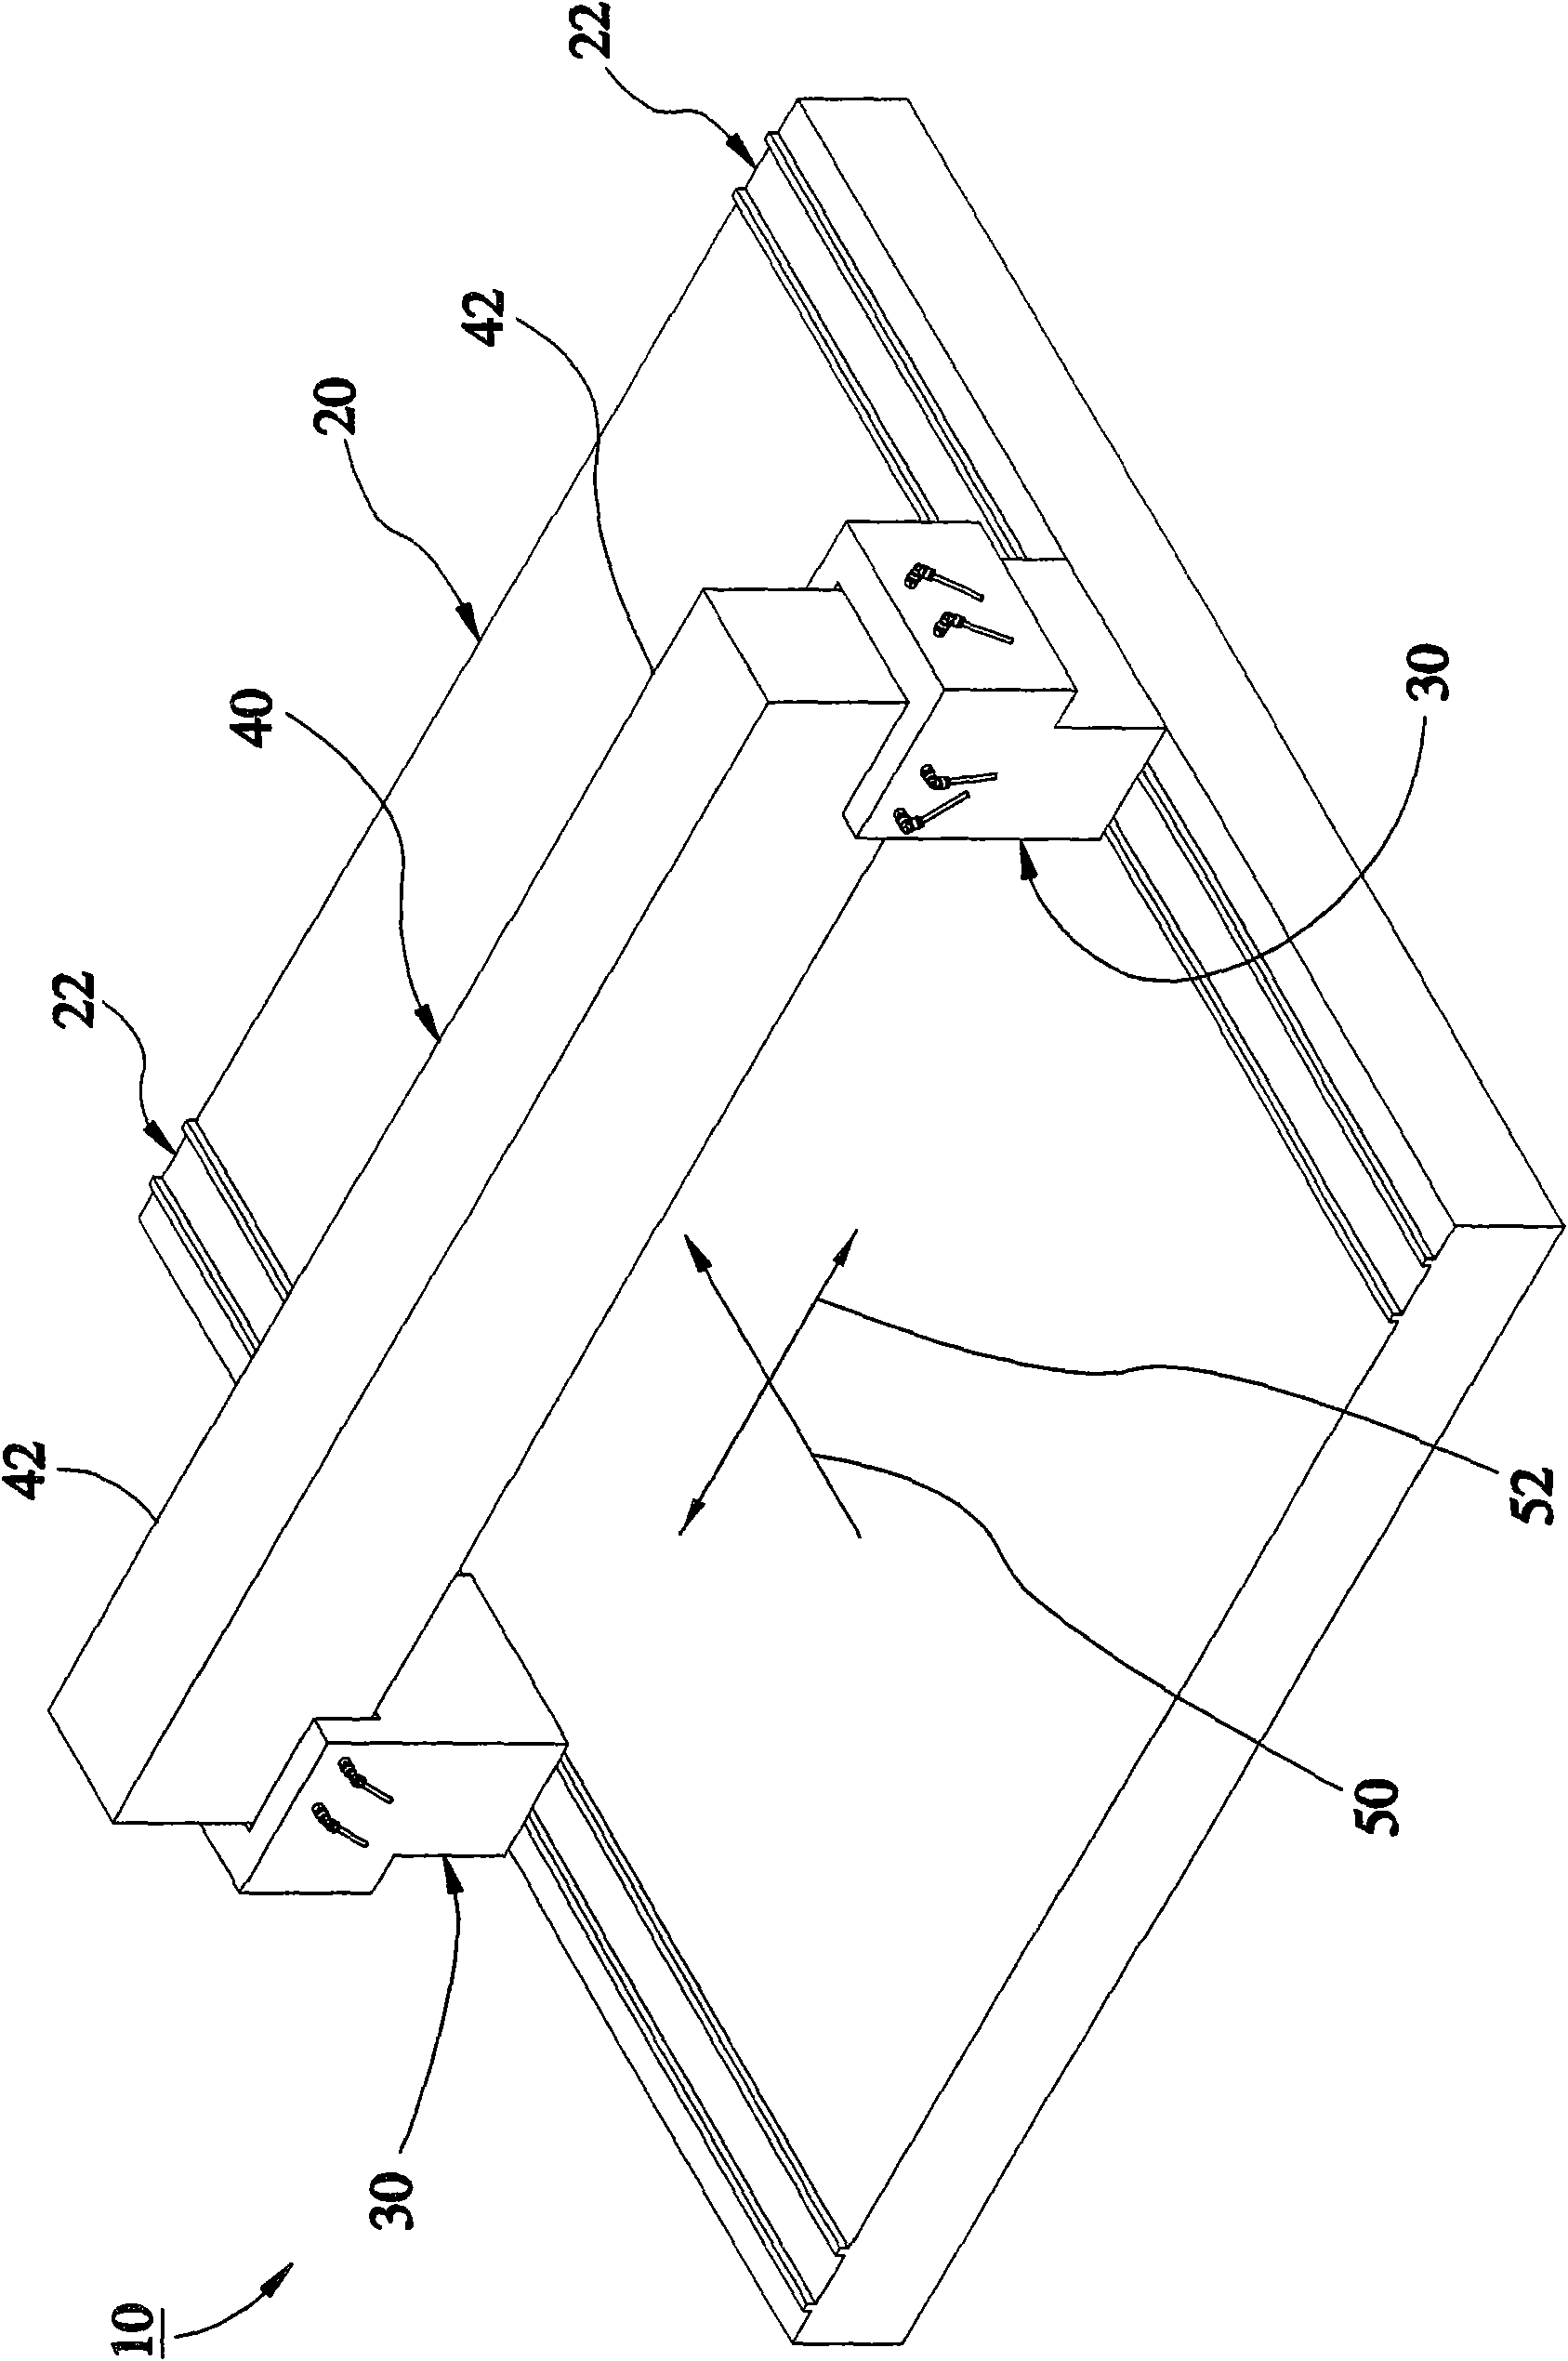 Floating double-axis synchronously moving mechanism